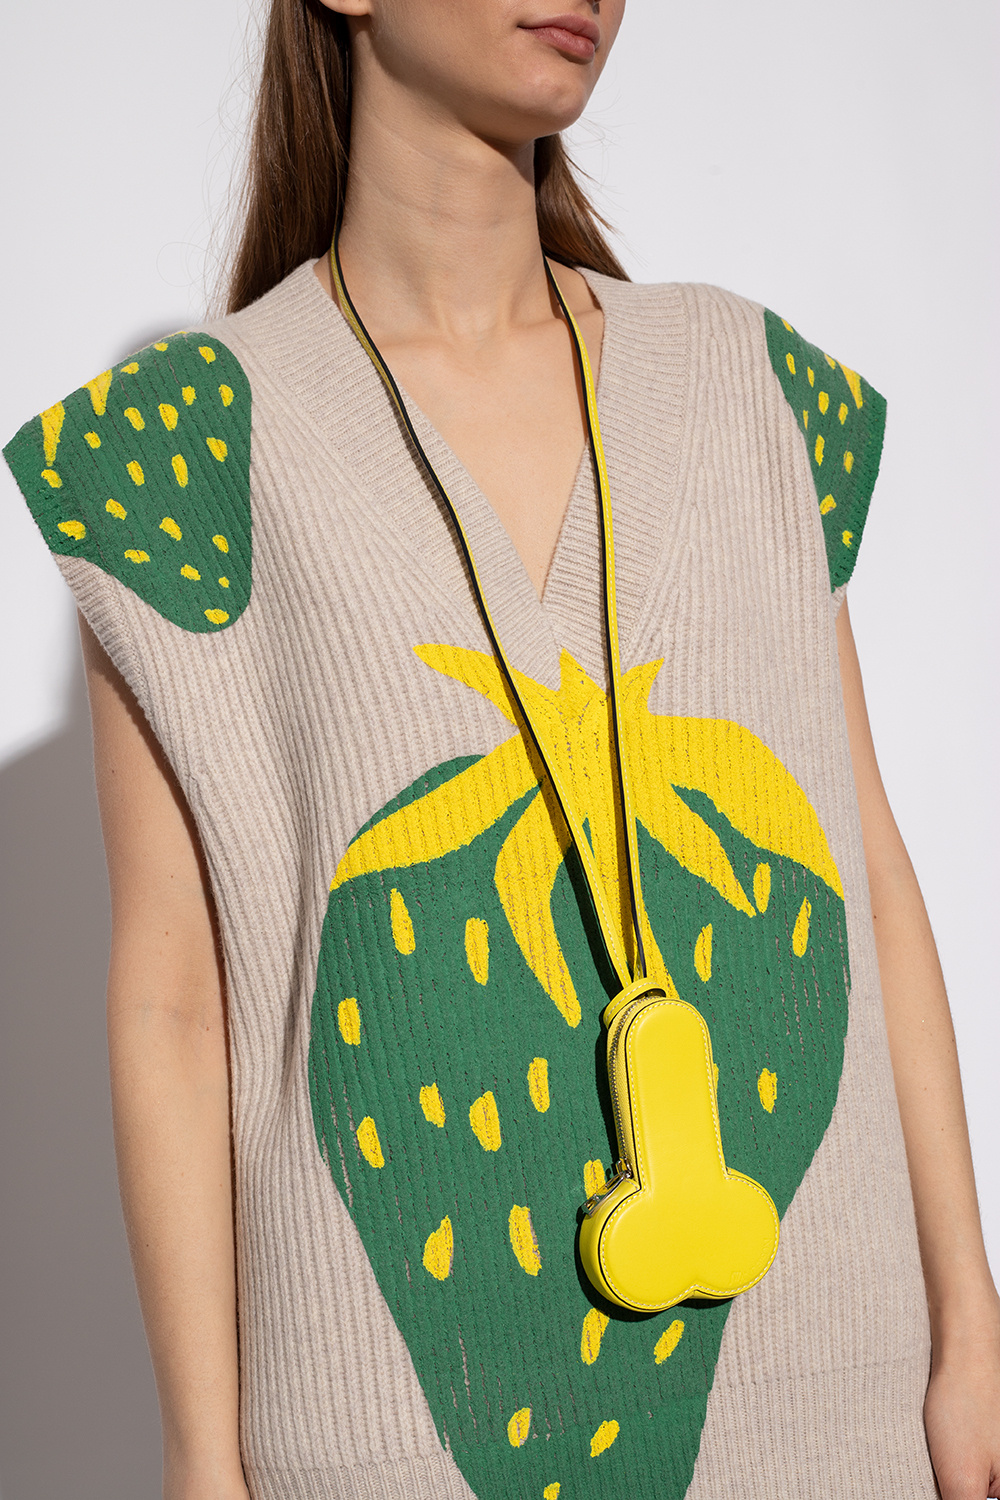 JW Anderson The hottest trend